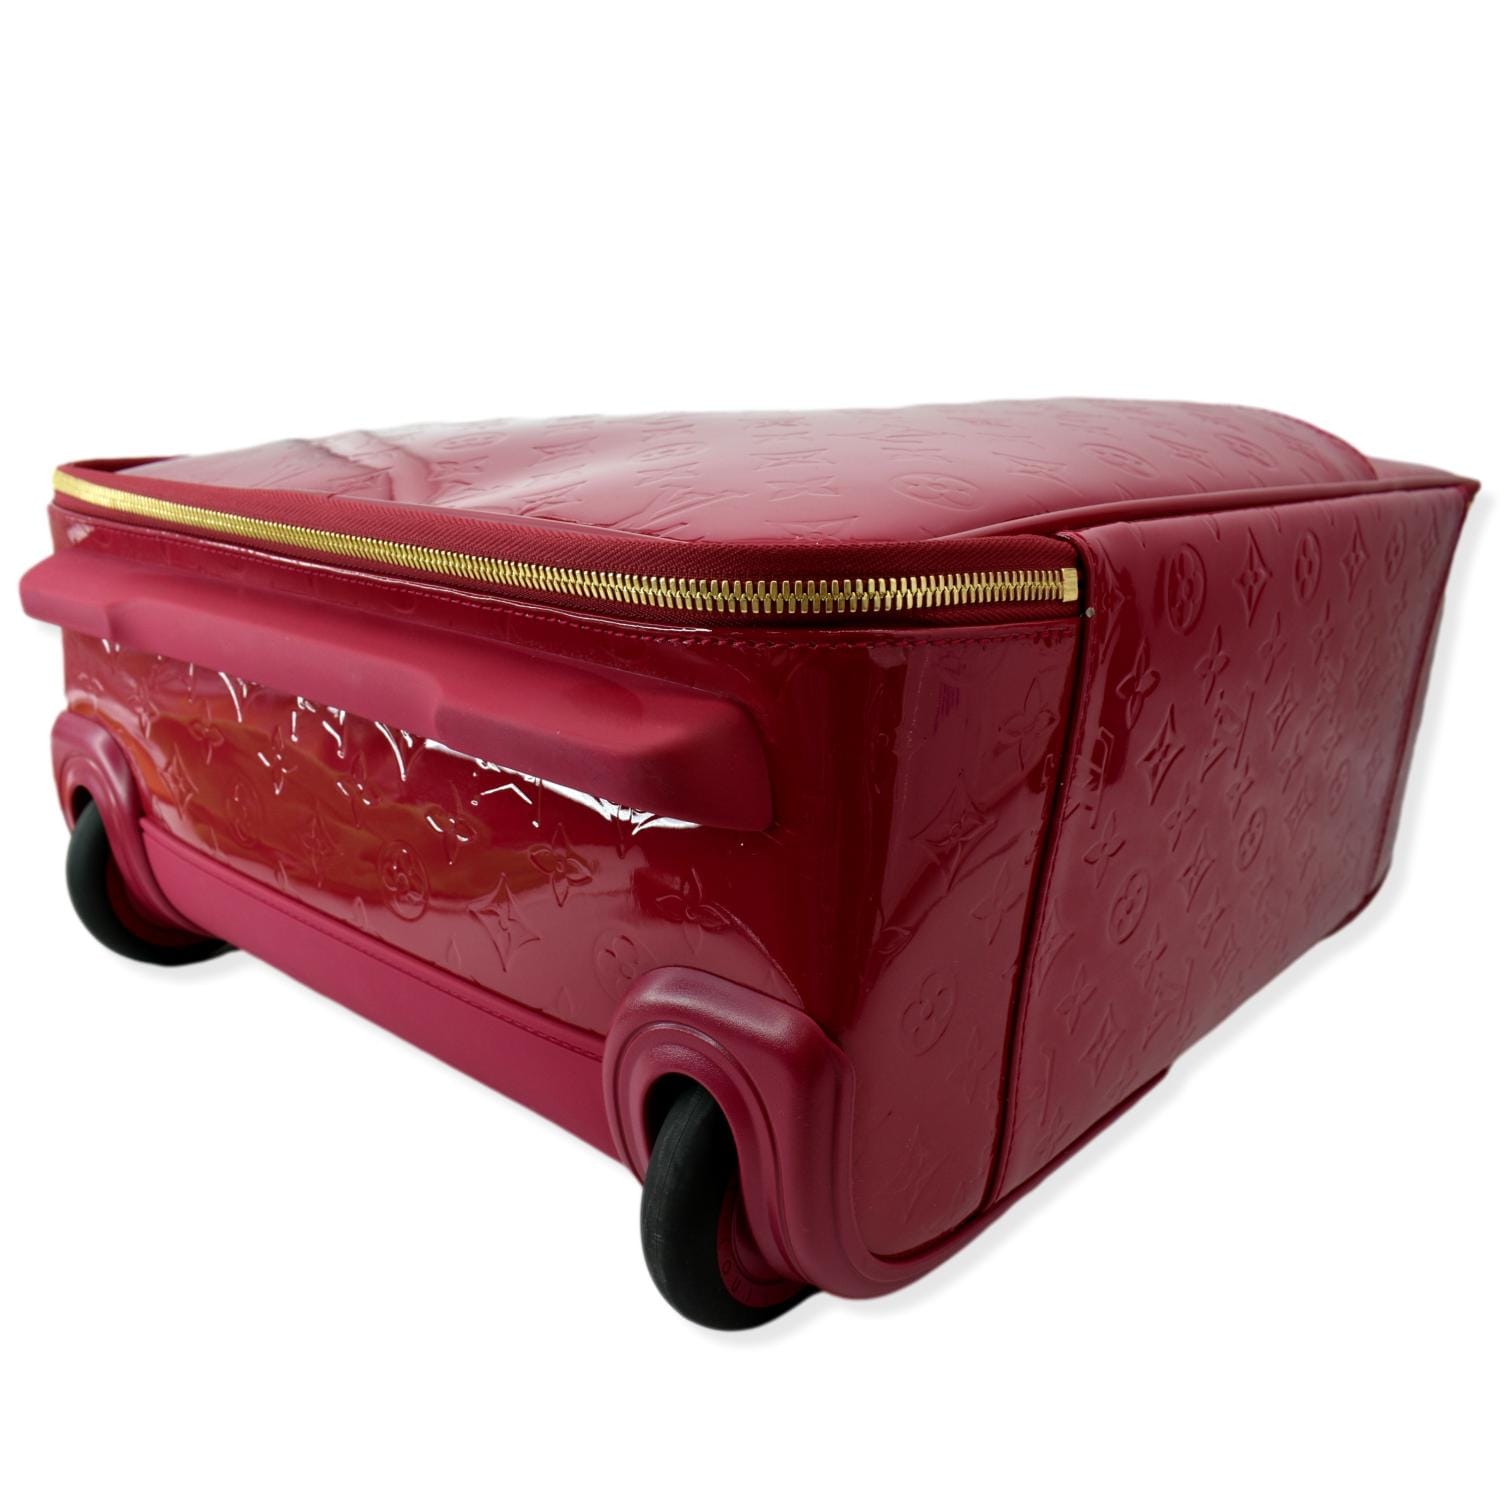 French Louis Vuitton Leather Traveling Attache Suitcase Case - Ruby Lane